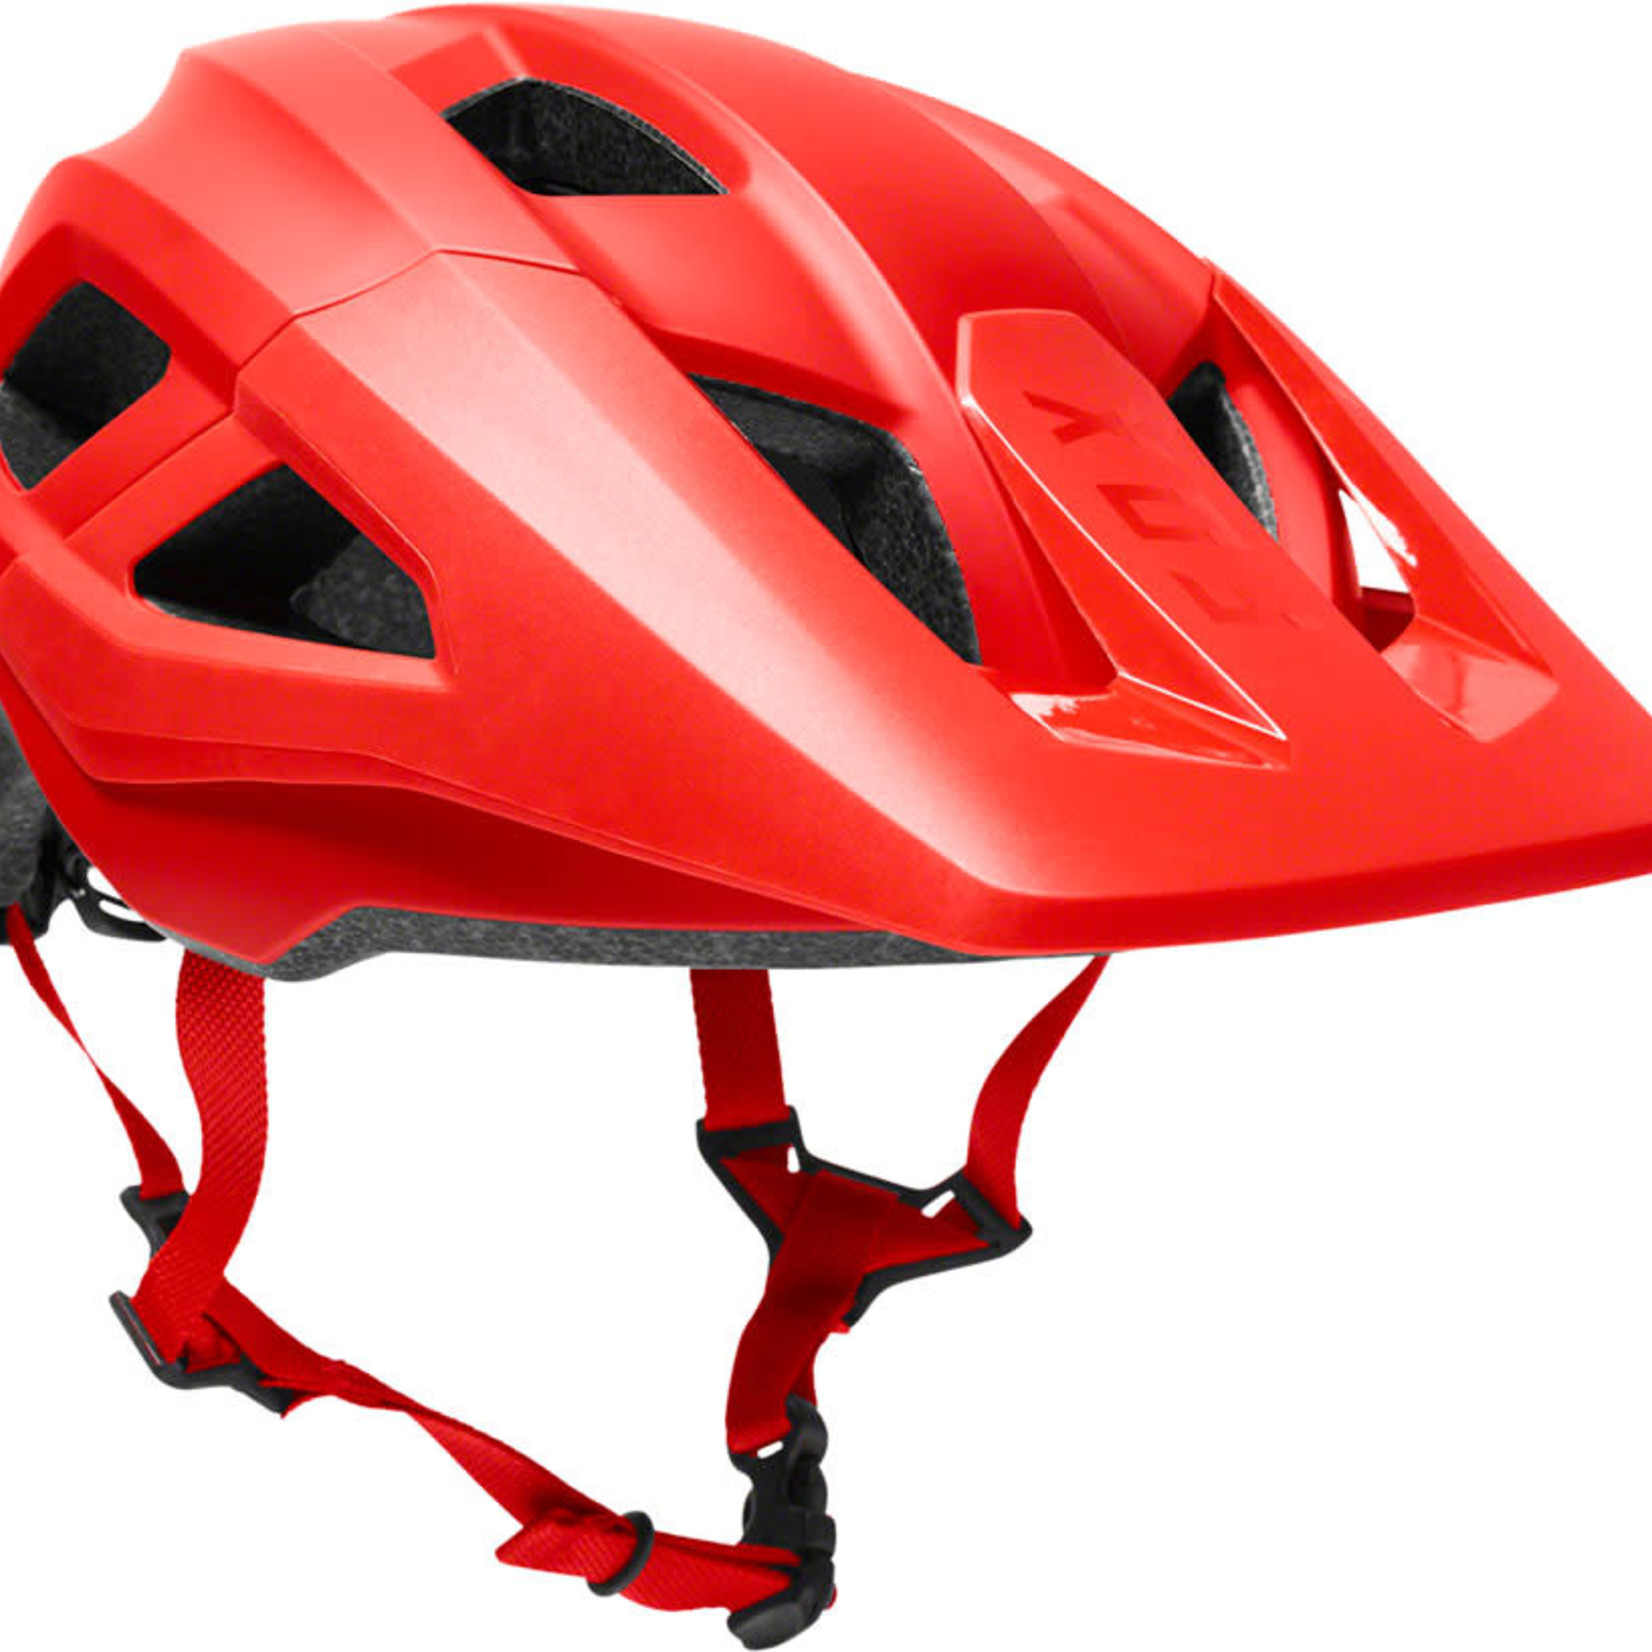 Fox Racing Fox Racing Youth Mainframe Helmet - Fluorescent Red One Size